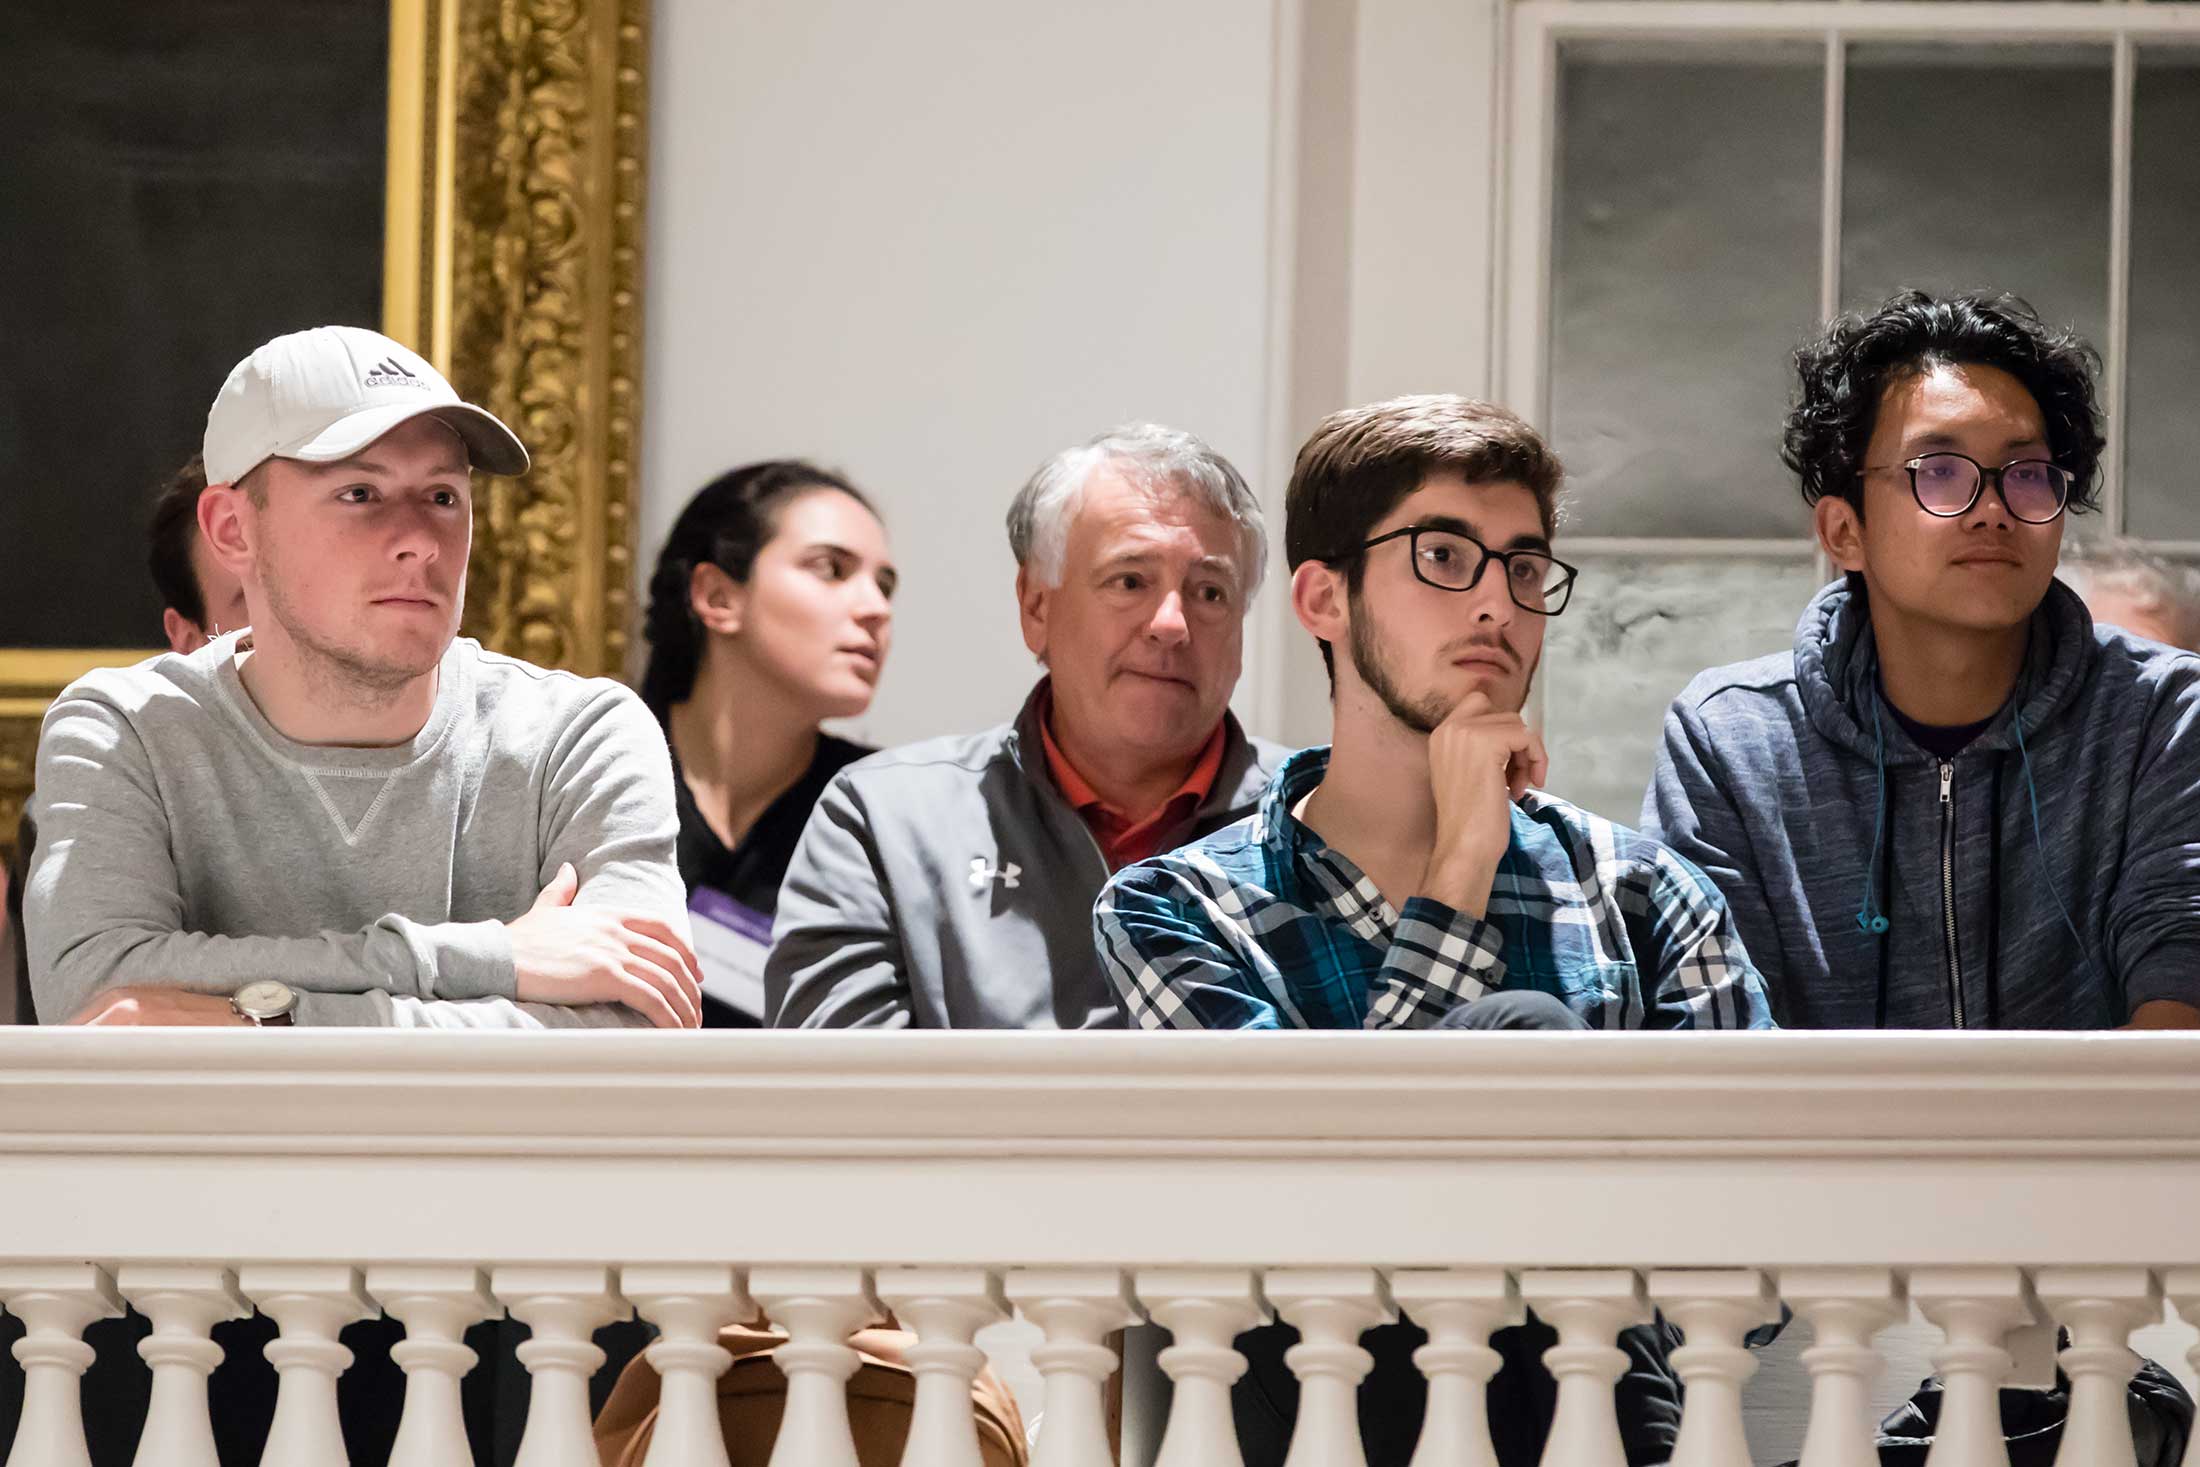 Audience members listening to author Michael Lewis speak at Amherst College